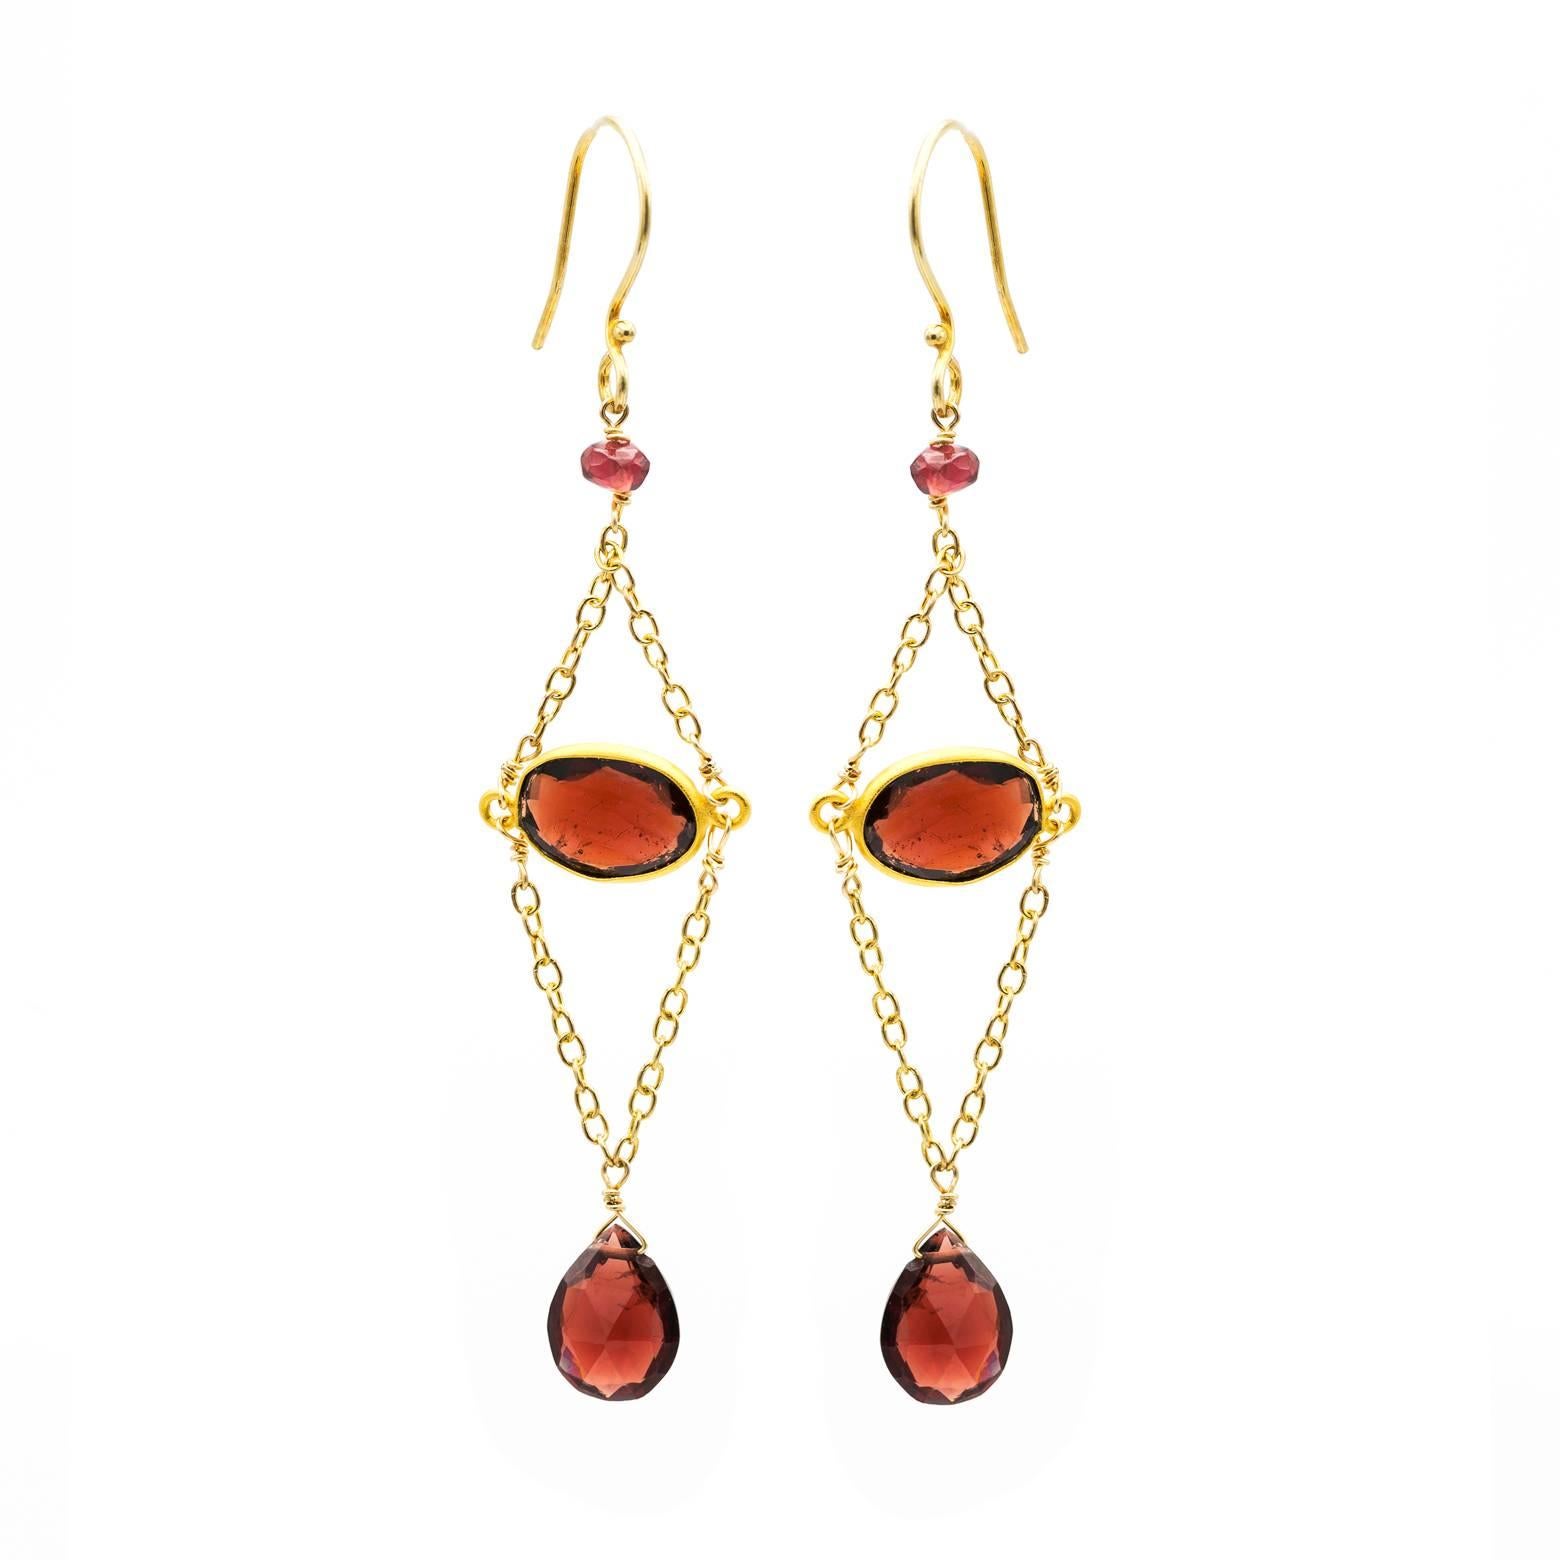 These long and elegant garnet earrings are festive and bright! Facets on all beads are decorated and embellished with gold chains as they swing and capture the cinnamon tainted light. Gorgeous and beautiful!